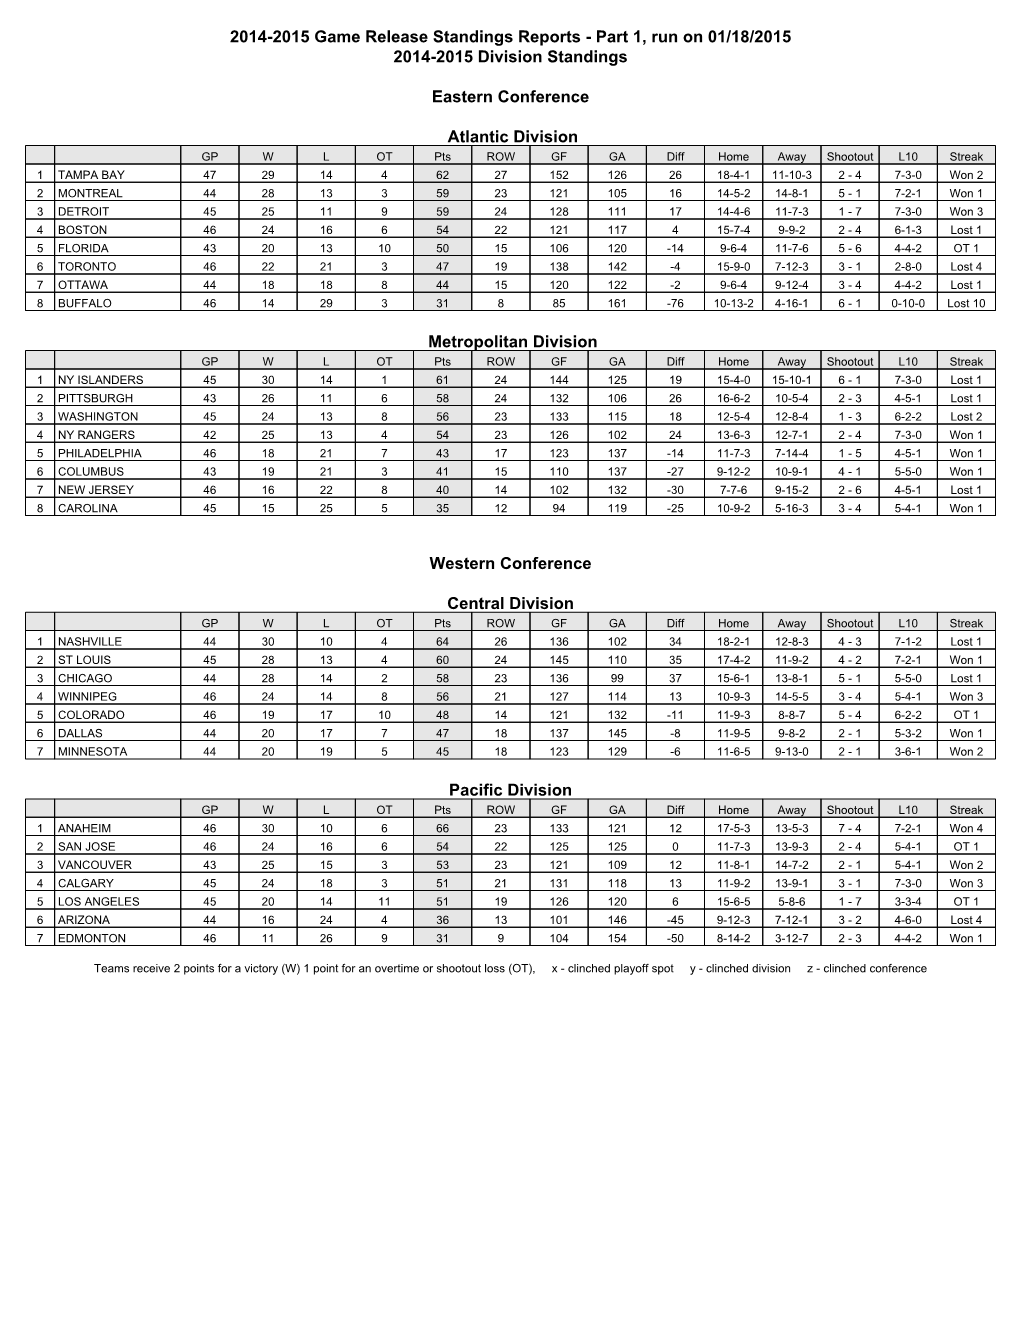 2014-2015 Game Release Standings Reports - Part 1, Run on 01/18/2015 2014-2015 Division Standings